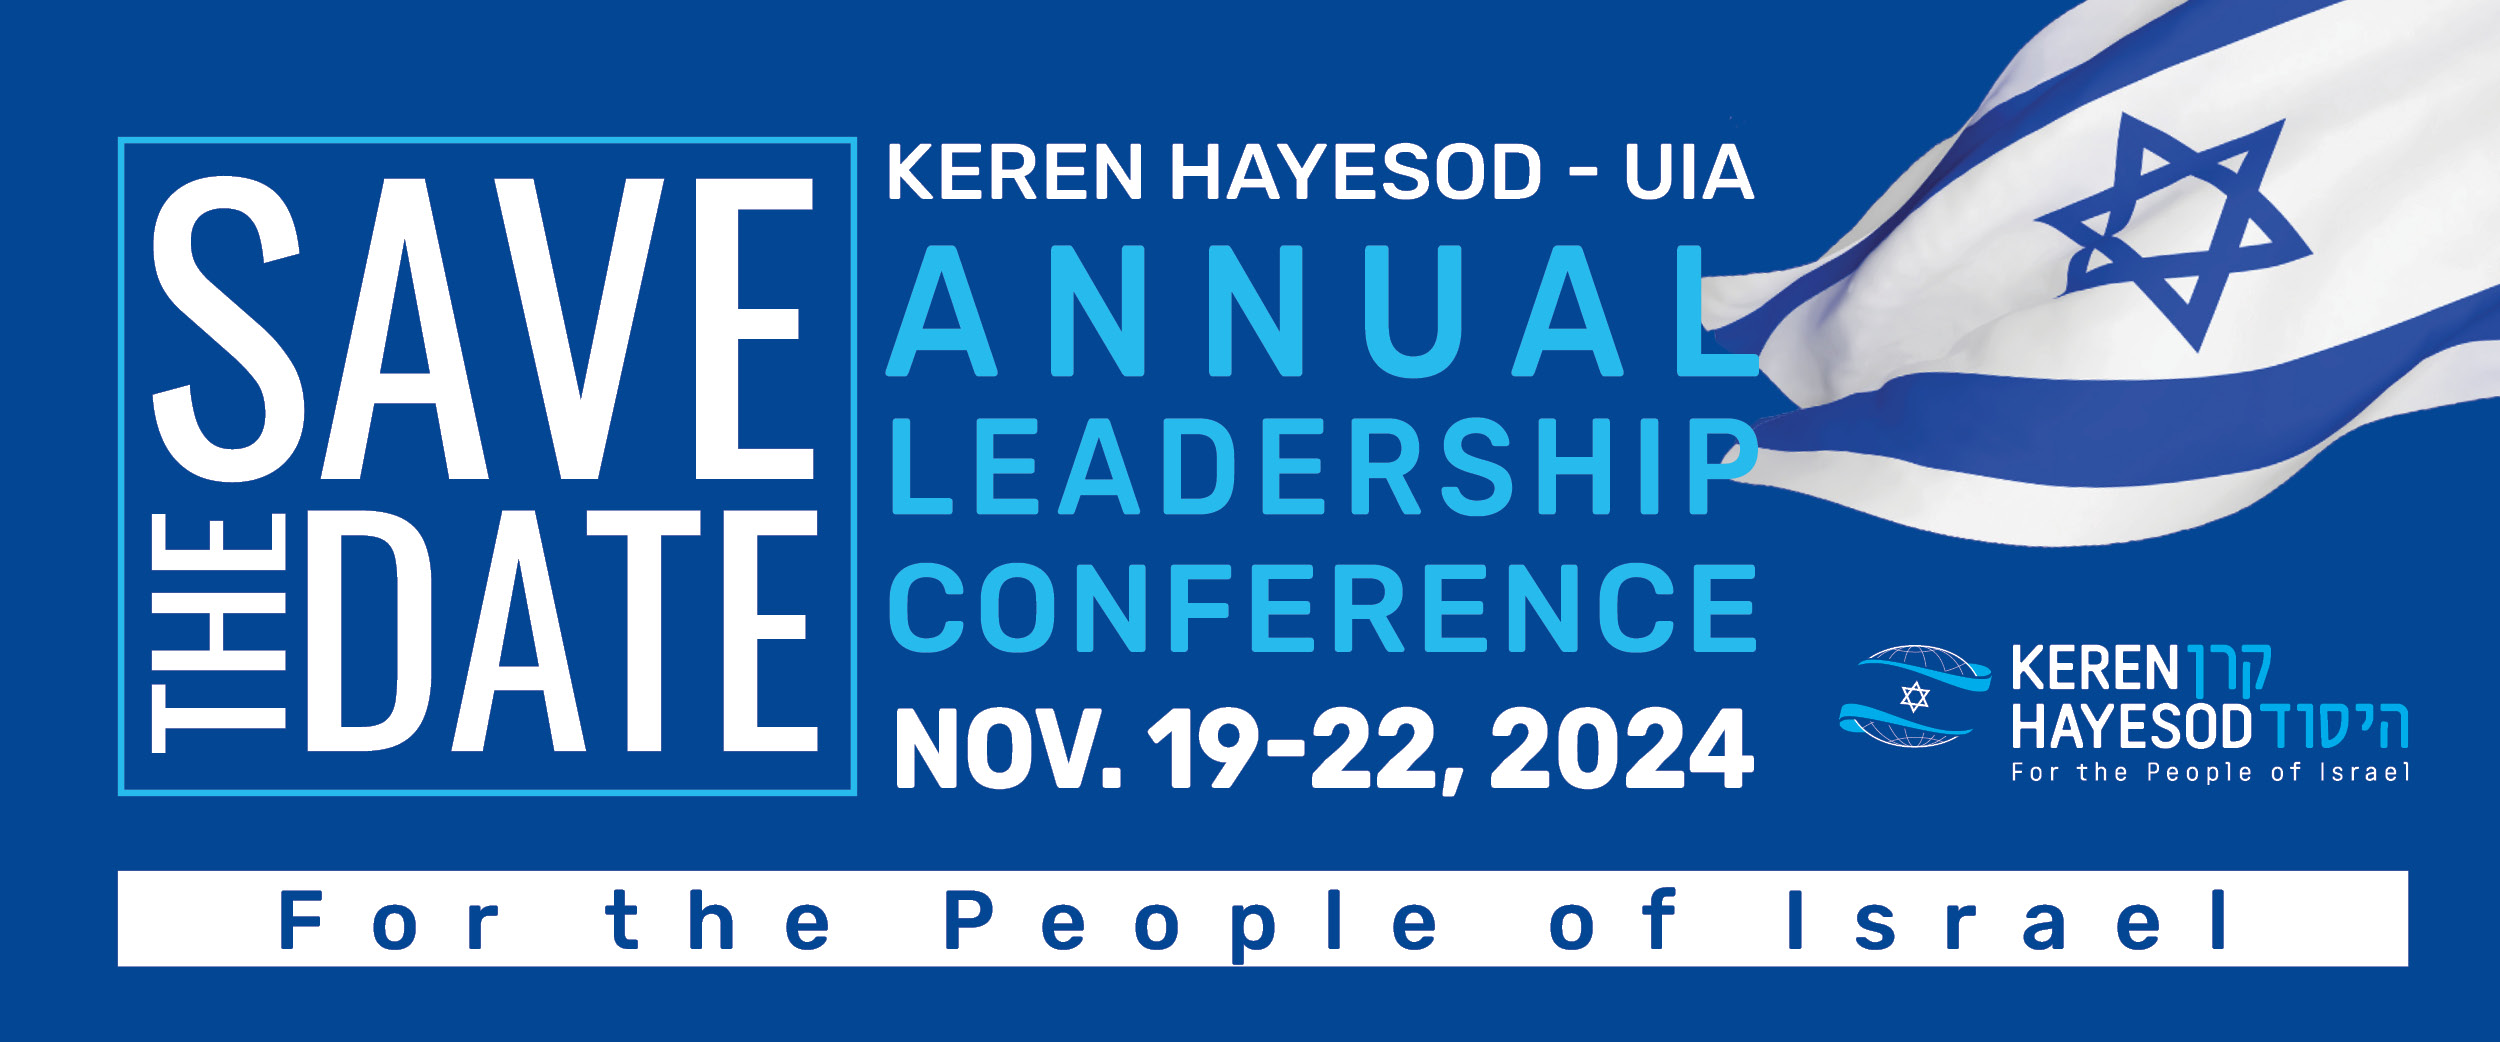 KH annual leadership conference